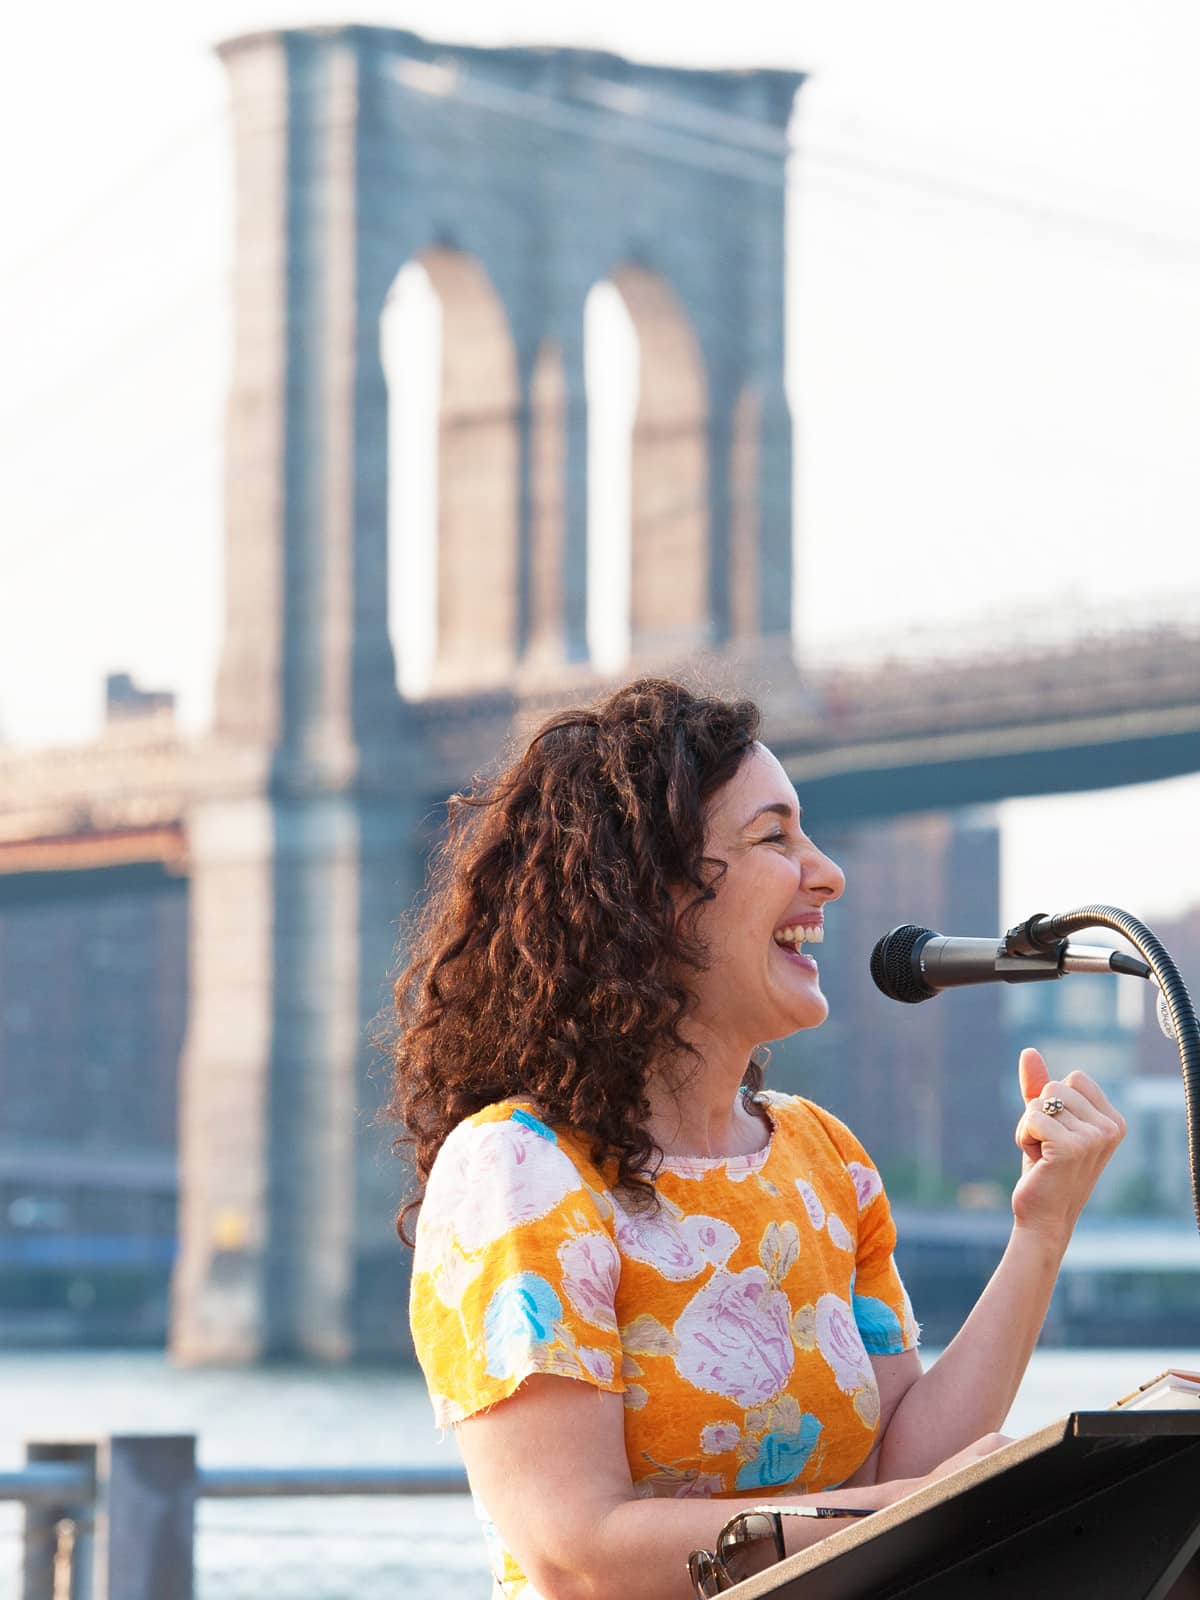 Woman smiling and standing at a podium at sunset. The Brooklyn Bridge is seen in the background.